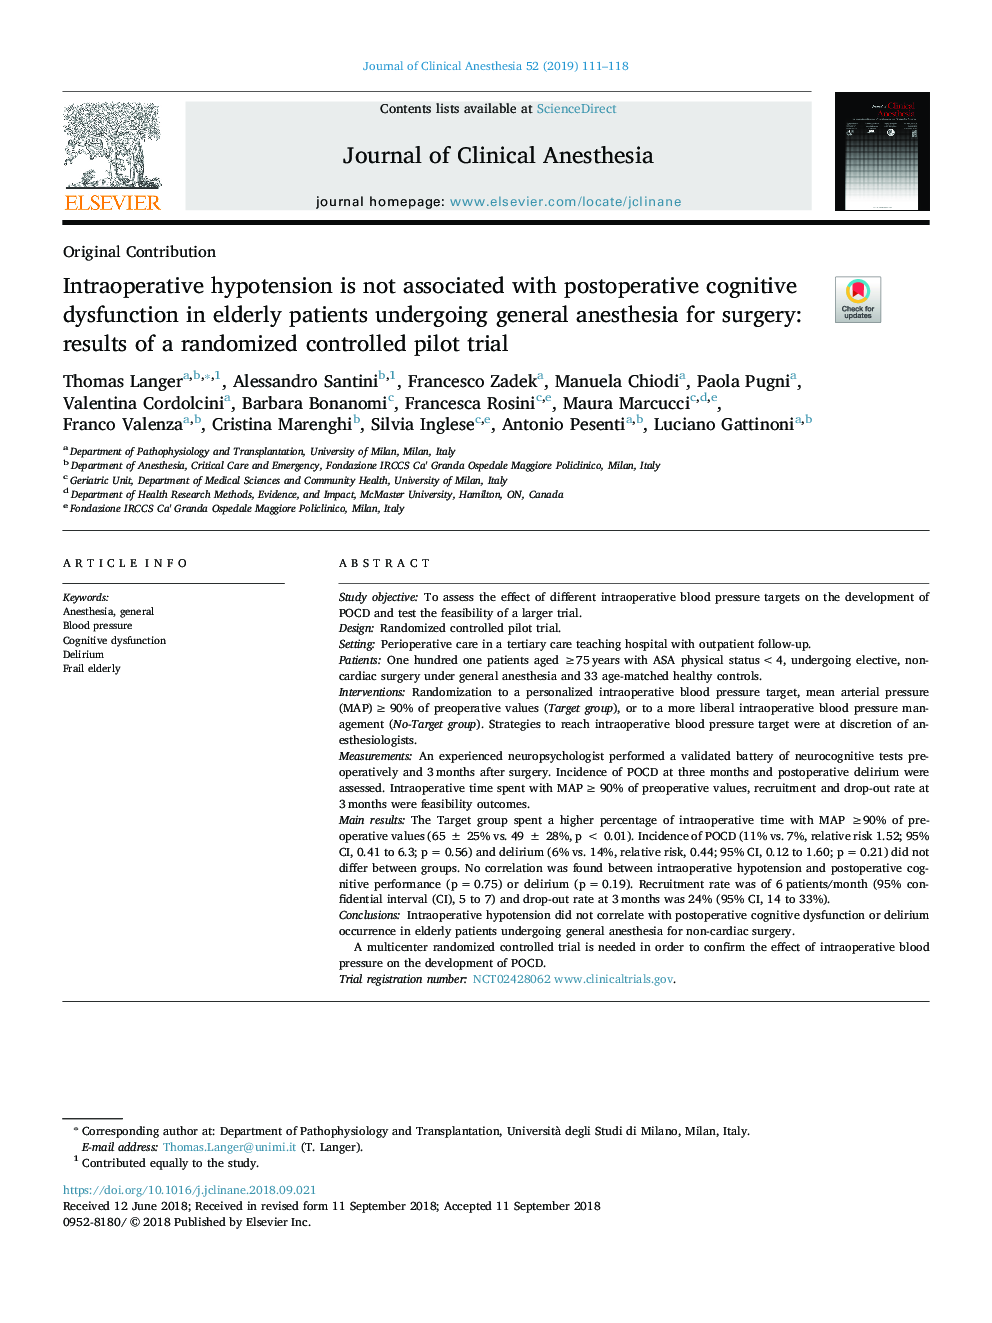 Intraoperative hypotension is not associated with postoperative cognitive dysfunction in elderly patients undergoing general anesthesia for surgery: results of a randomized controlled pilot trial